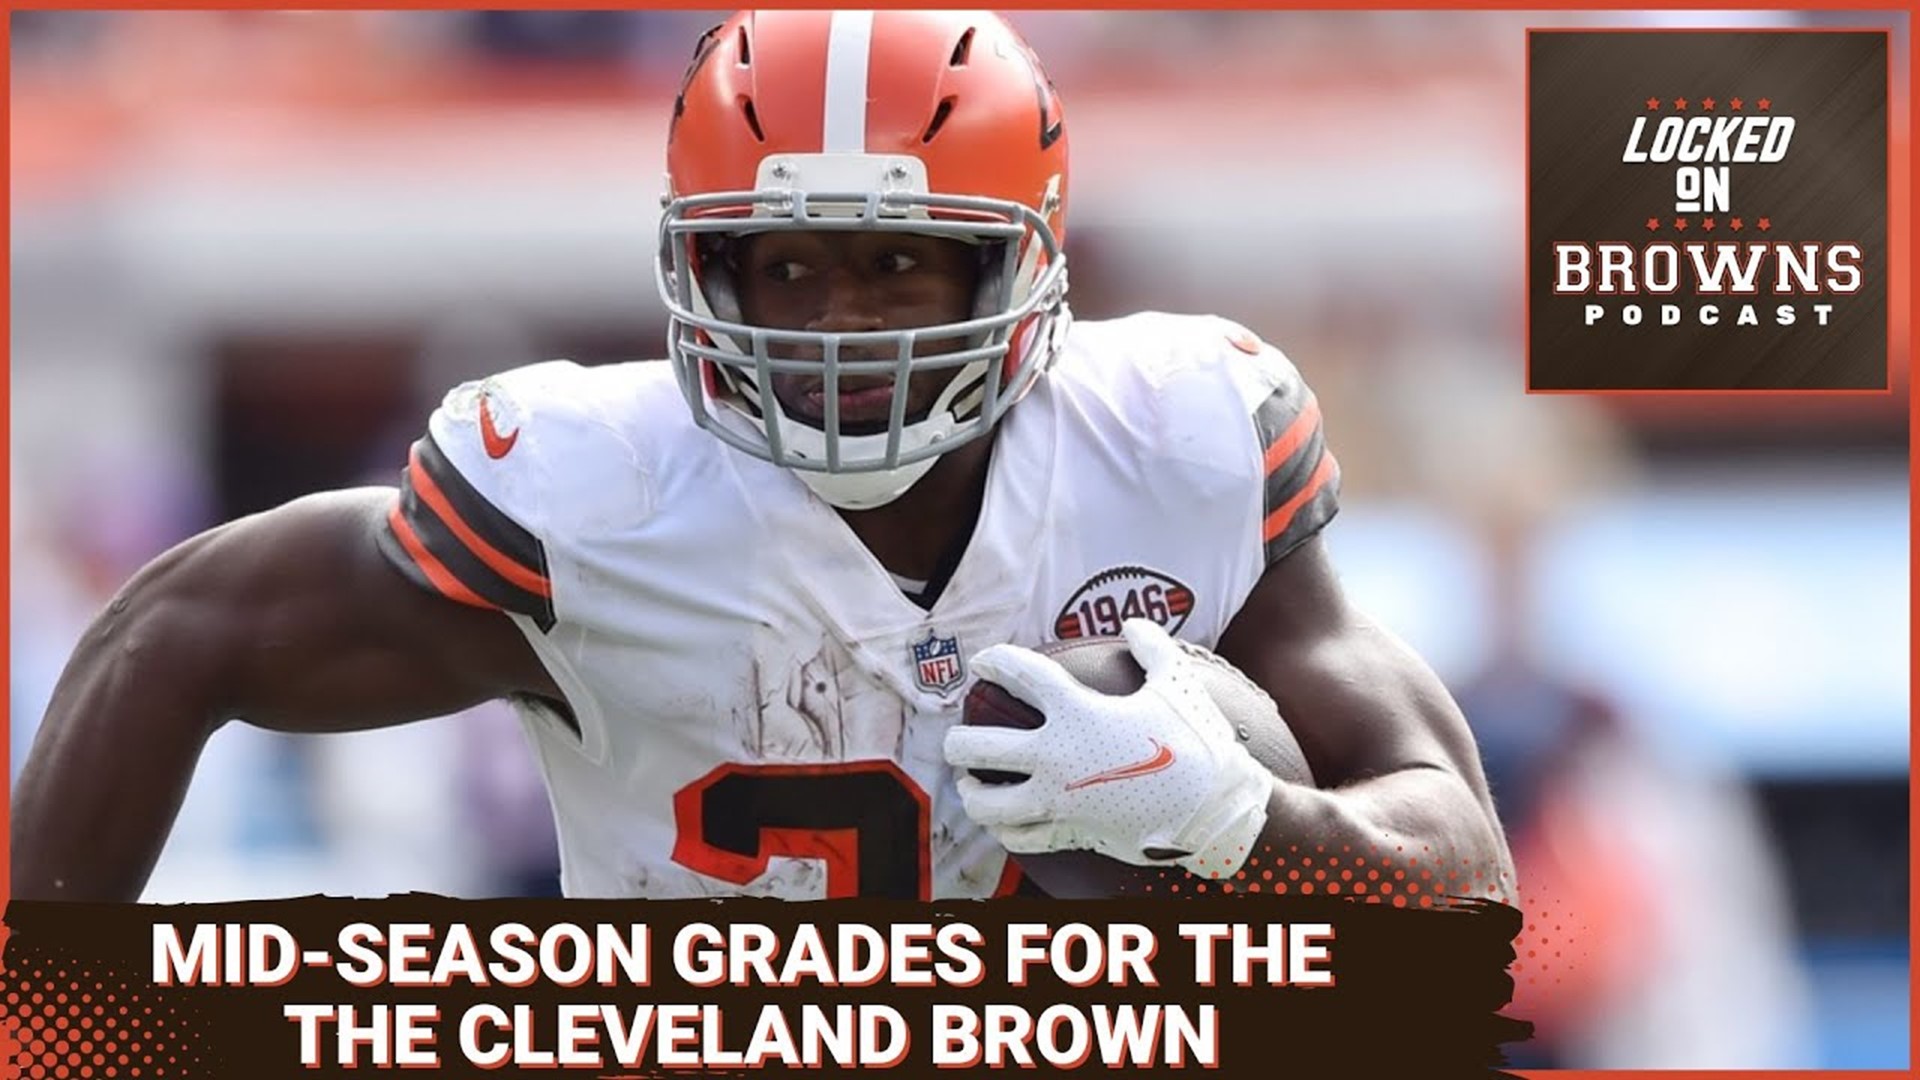 As the Cleveland Browns prepare for their final games of the season, we take a look at which players have been the biggest surprises so far.